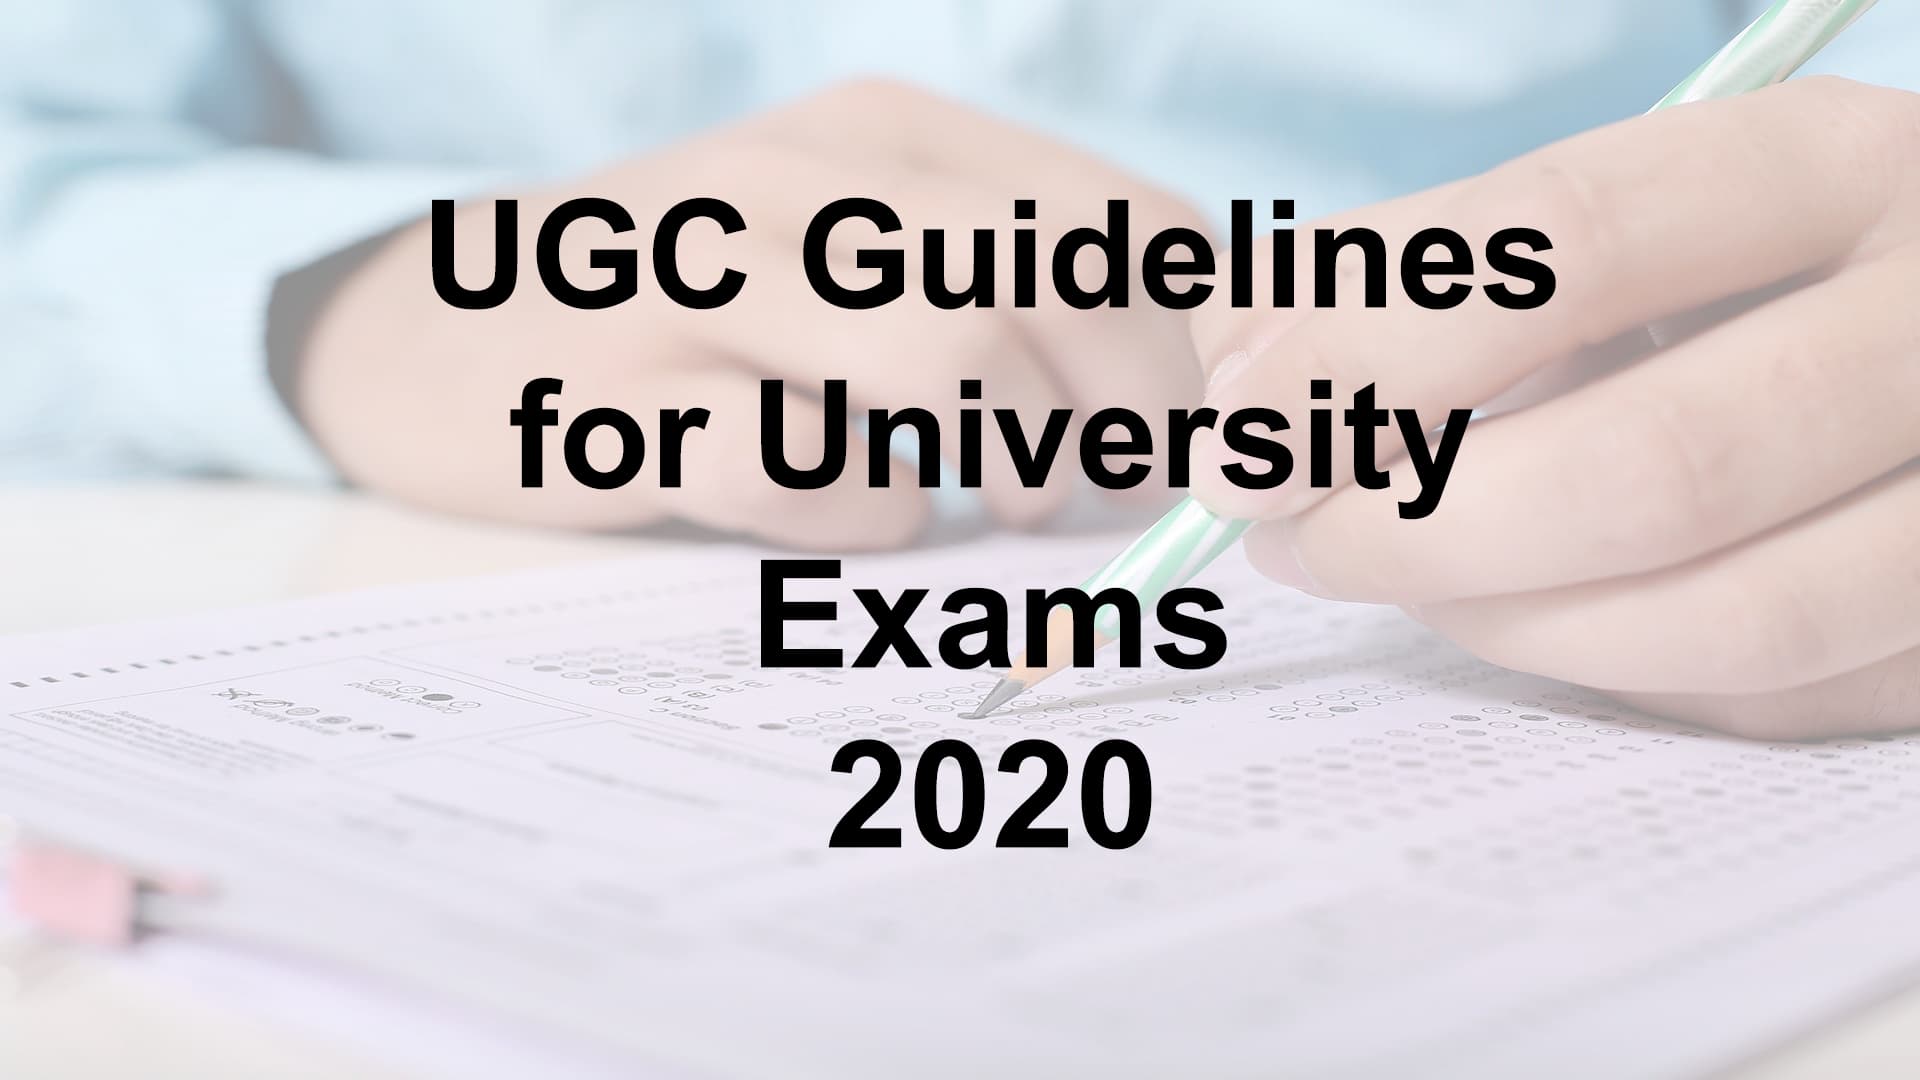 UGC Guidelines for University Exams 2020